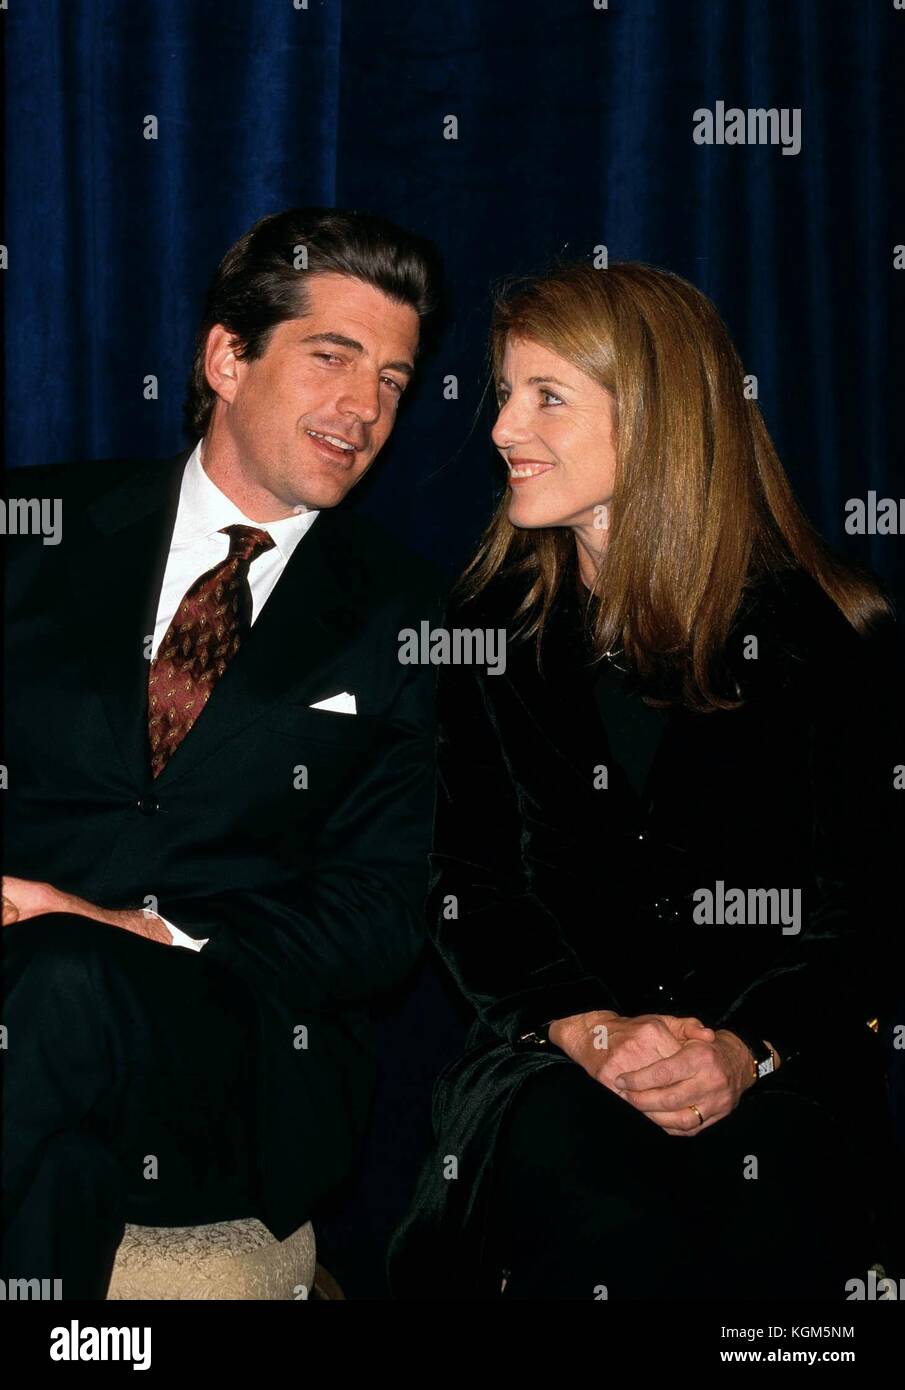 John F. Kennedy Jr. and Caroline Kennedy-Schlossberg at the announcement of the  Jackie Robinson Foundation Scholarship Fund in New York City. March 8, 1999  Credit: RTSpellman / MediaPunch Stock Photo